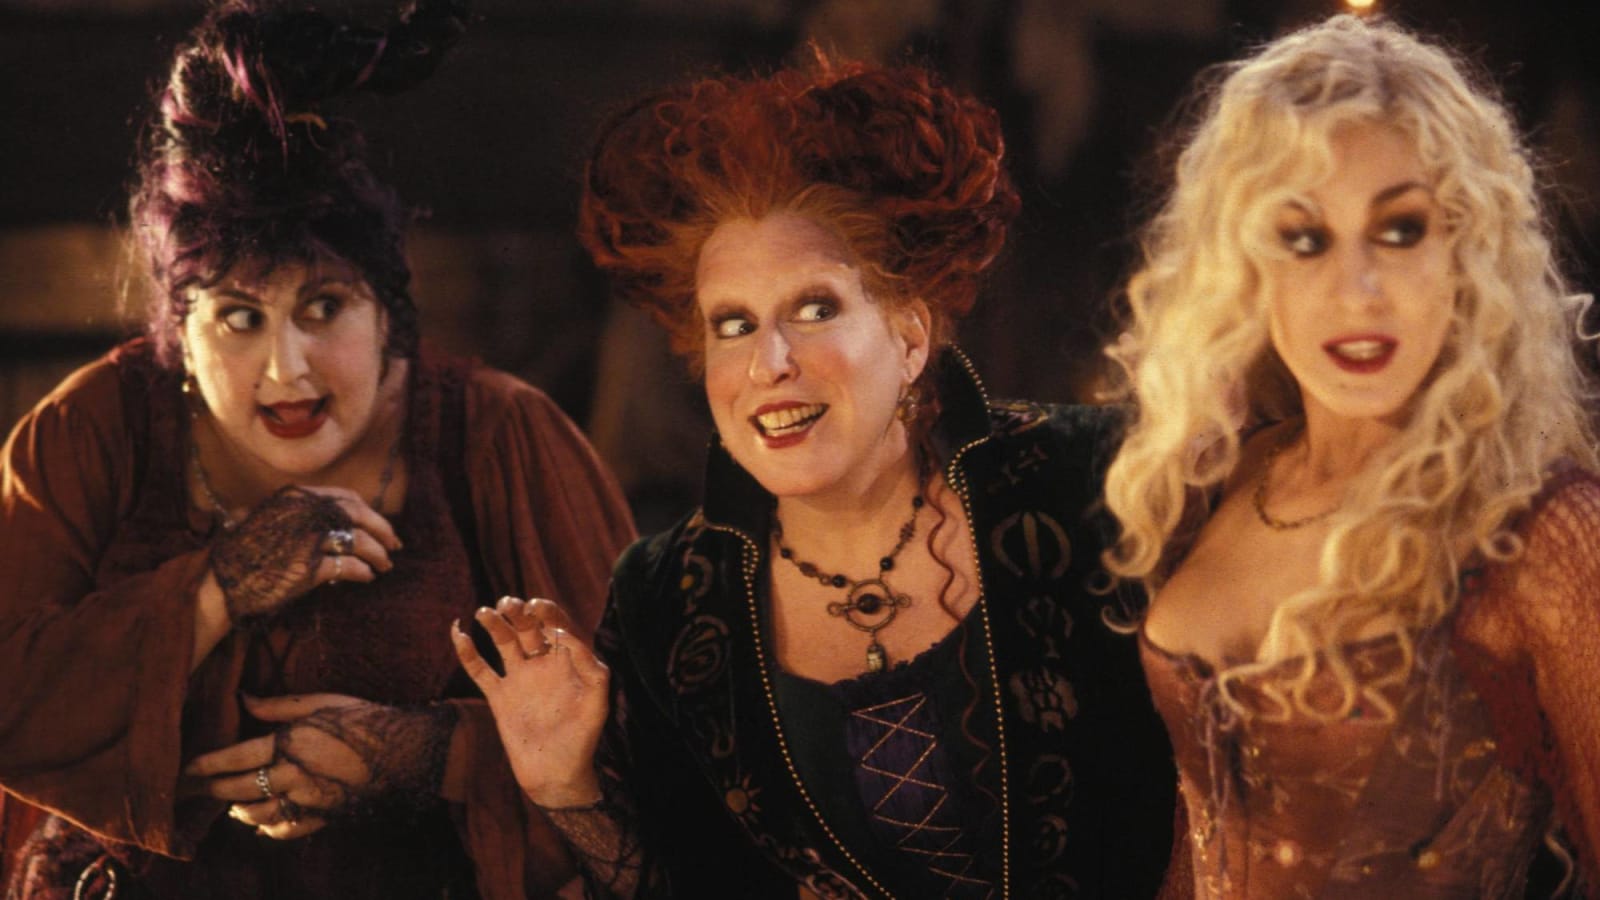 Bette Midler teases 'Hocus Pocus 2': 'It's been 300 years... But we’re BACK!'